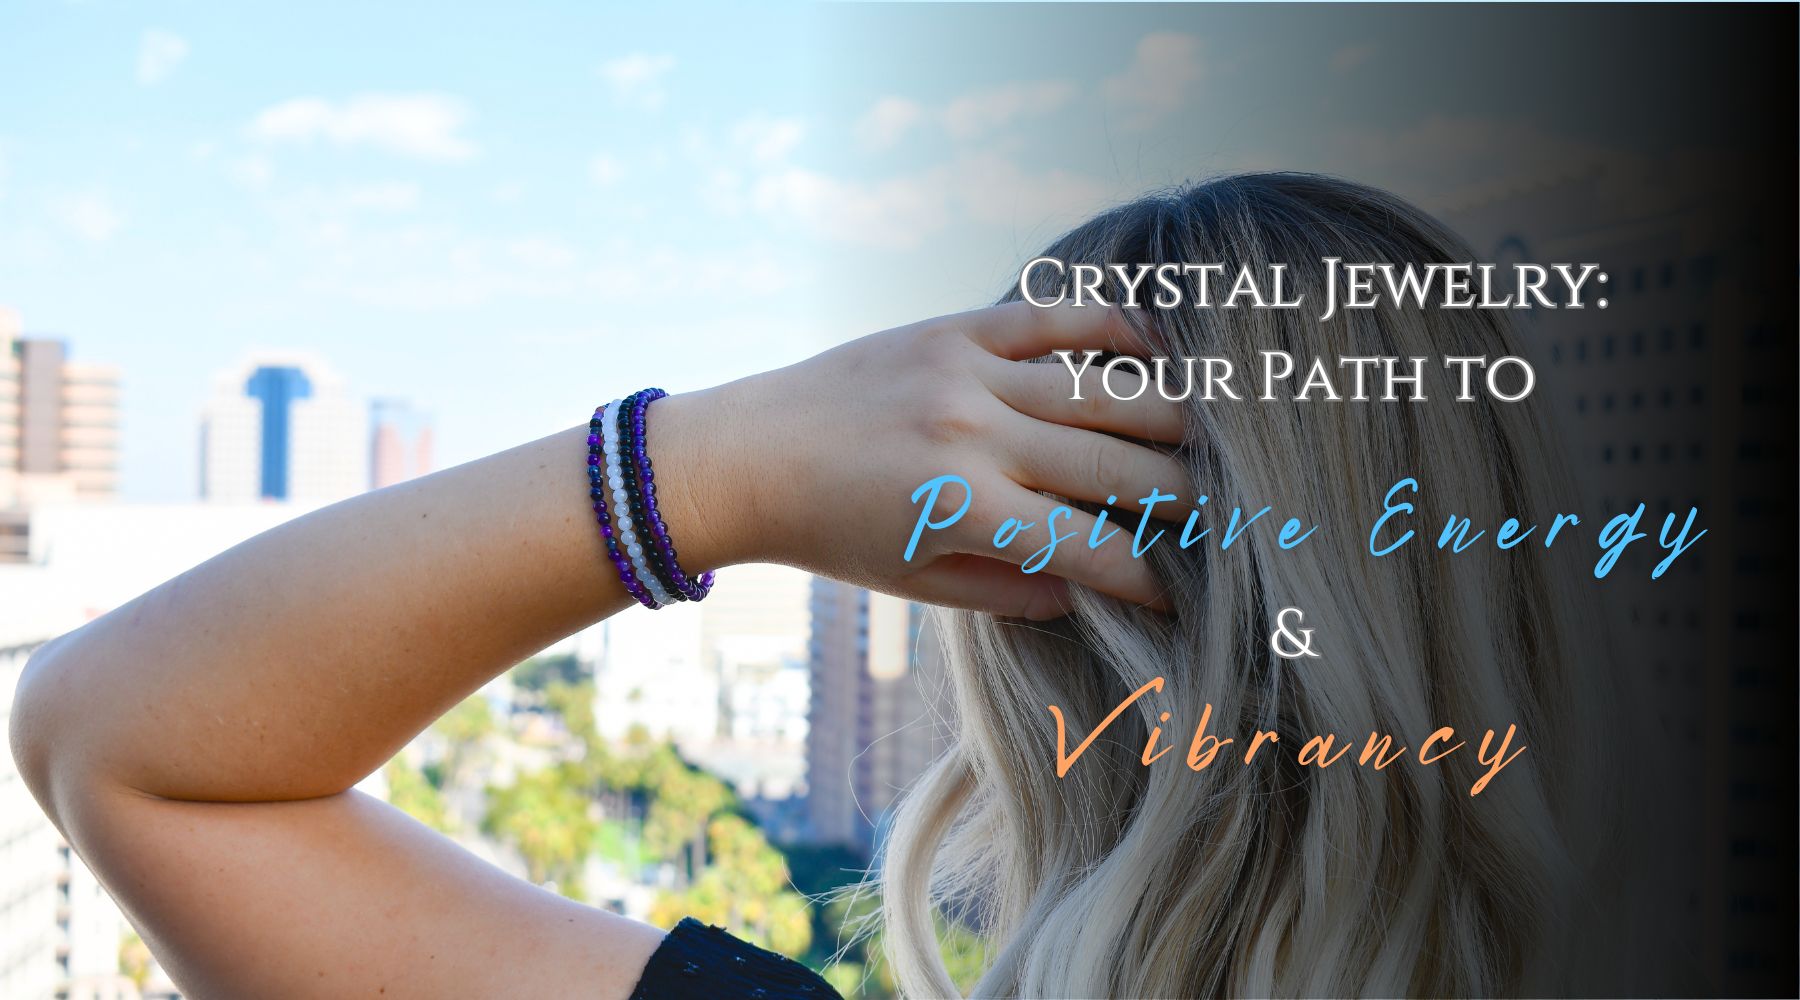 Crystal Jewelry: Your Path to Positive Energy and Vibrancy